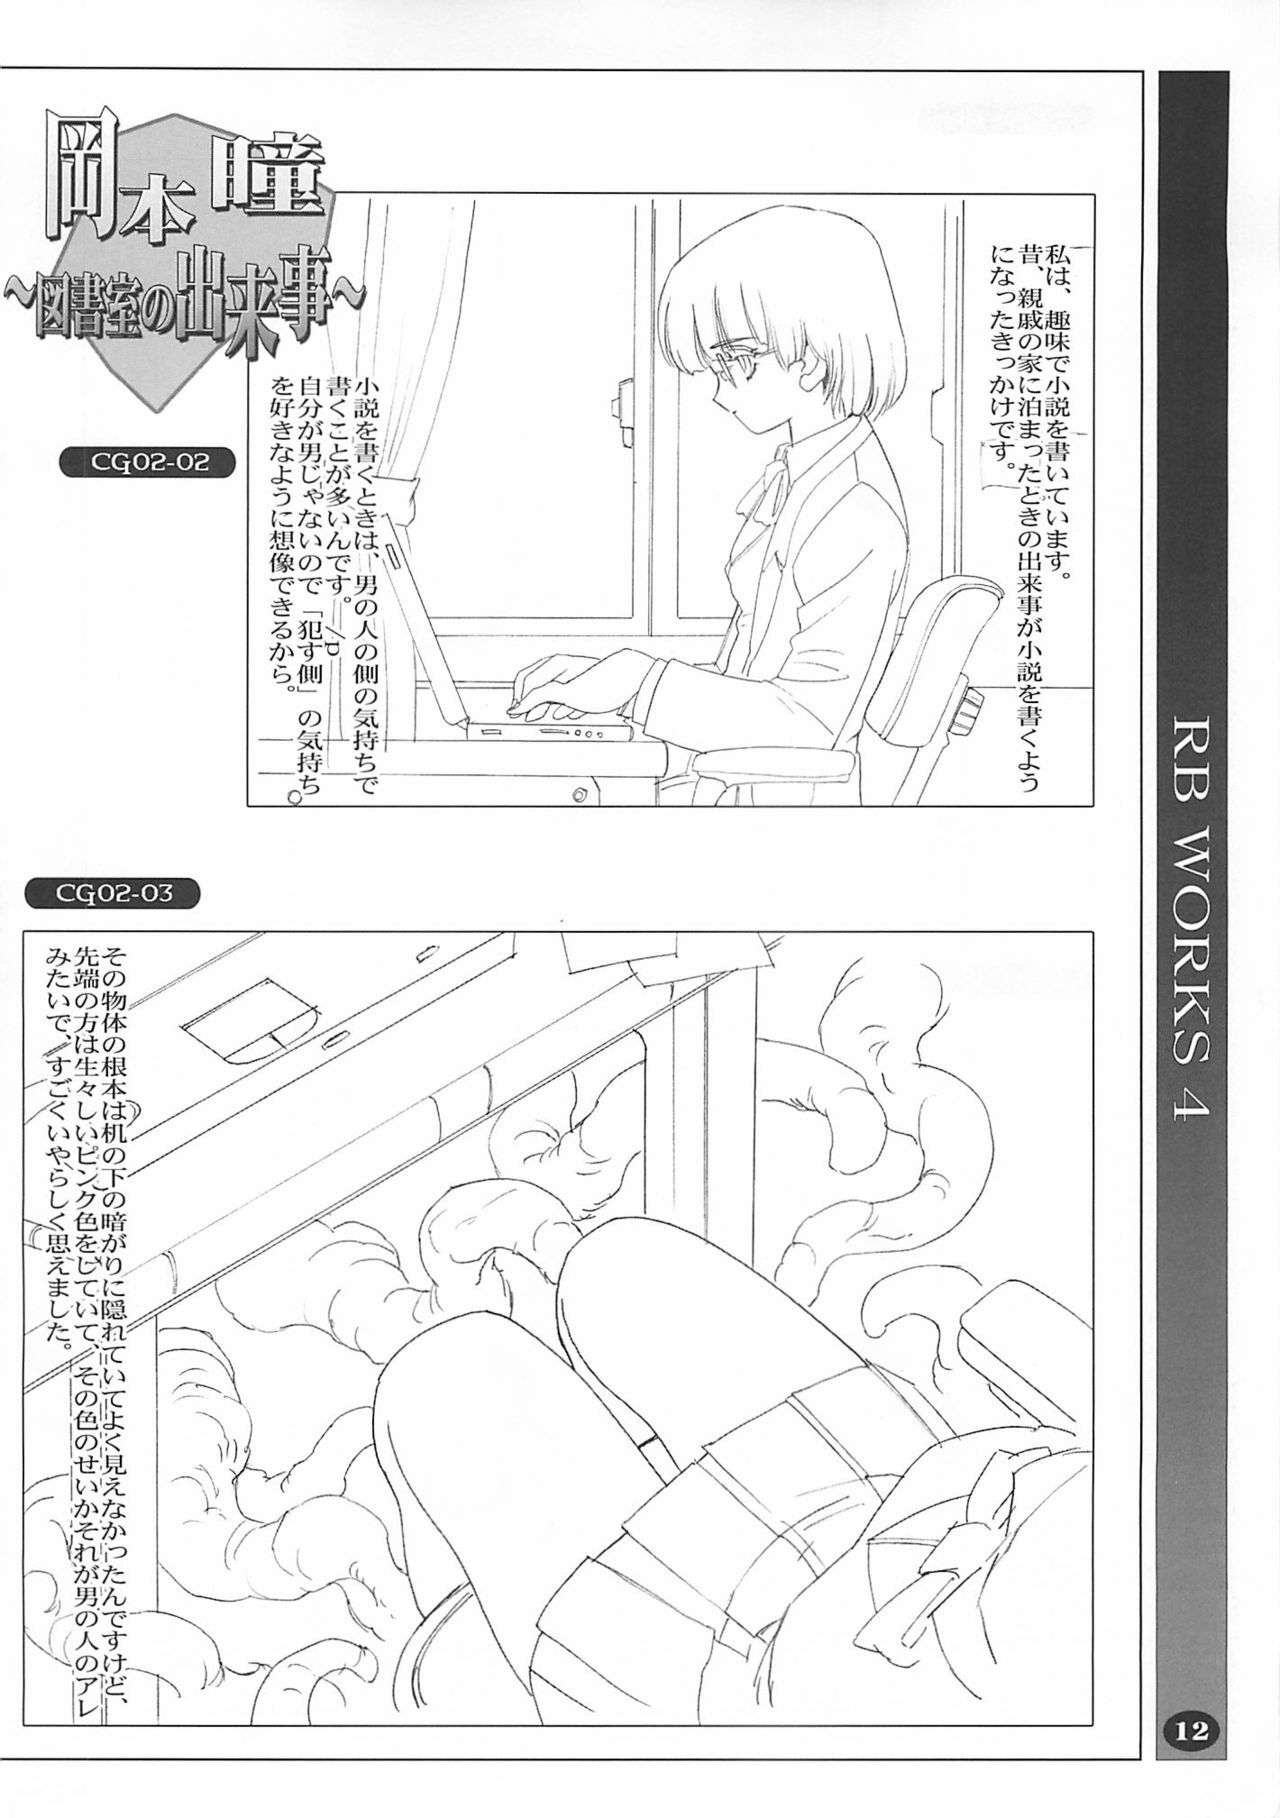 [HQ's (RINGER BELL & Kajiyama Hiroshi)] RB Works 4 - From THE Darkness & Darkness Again page 11 full